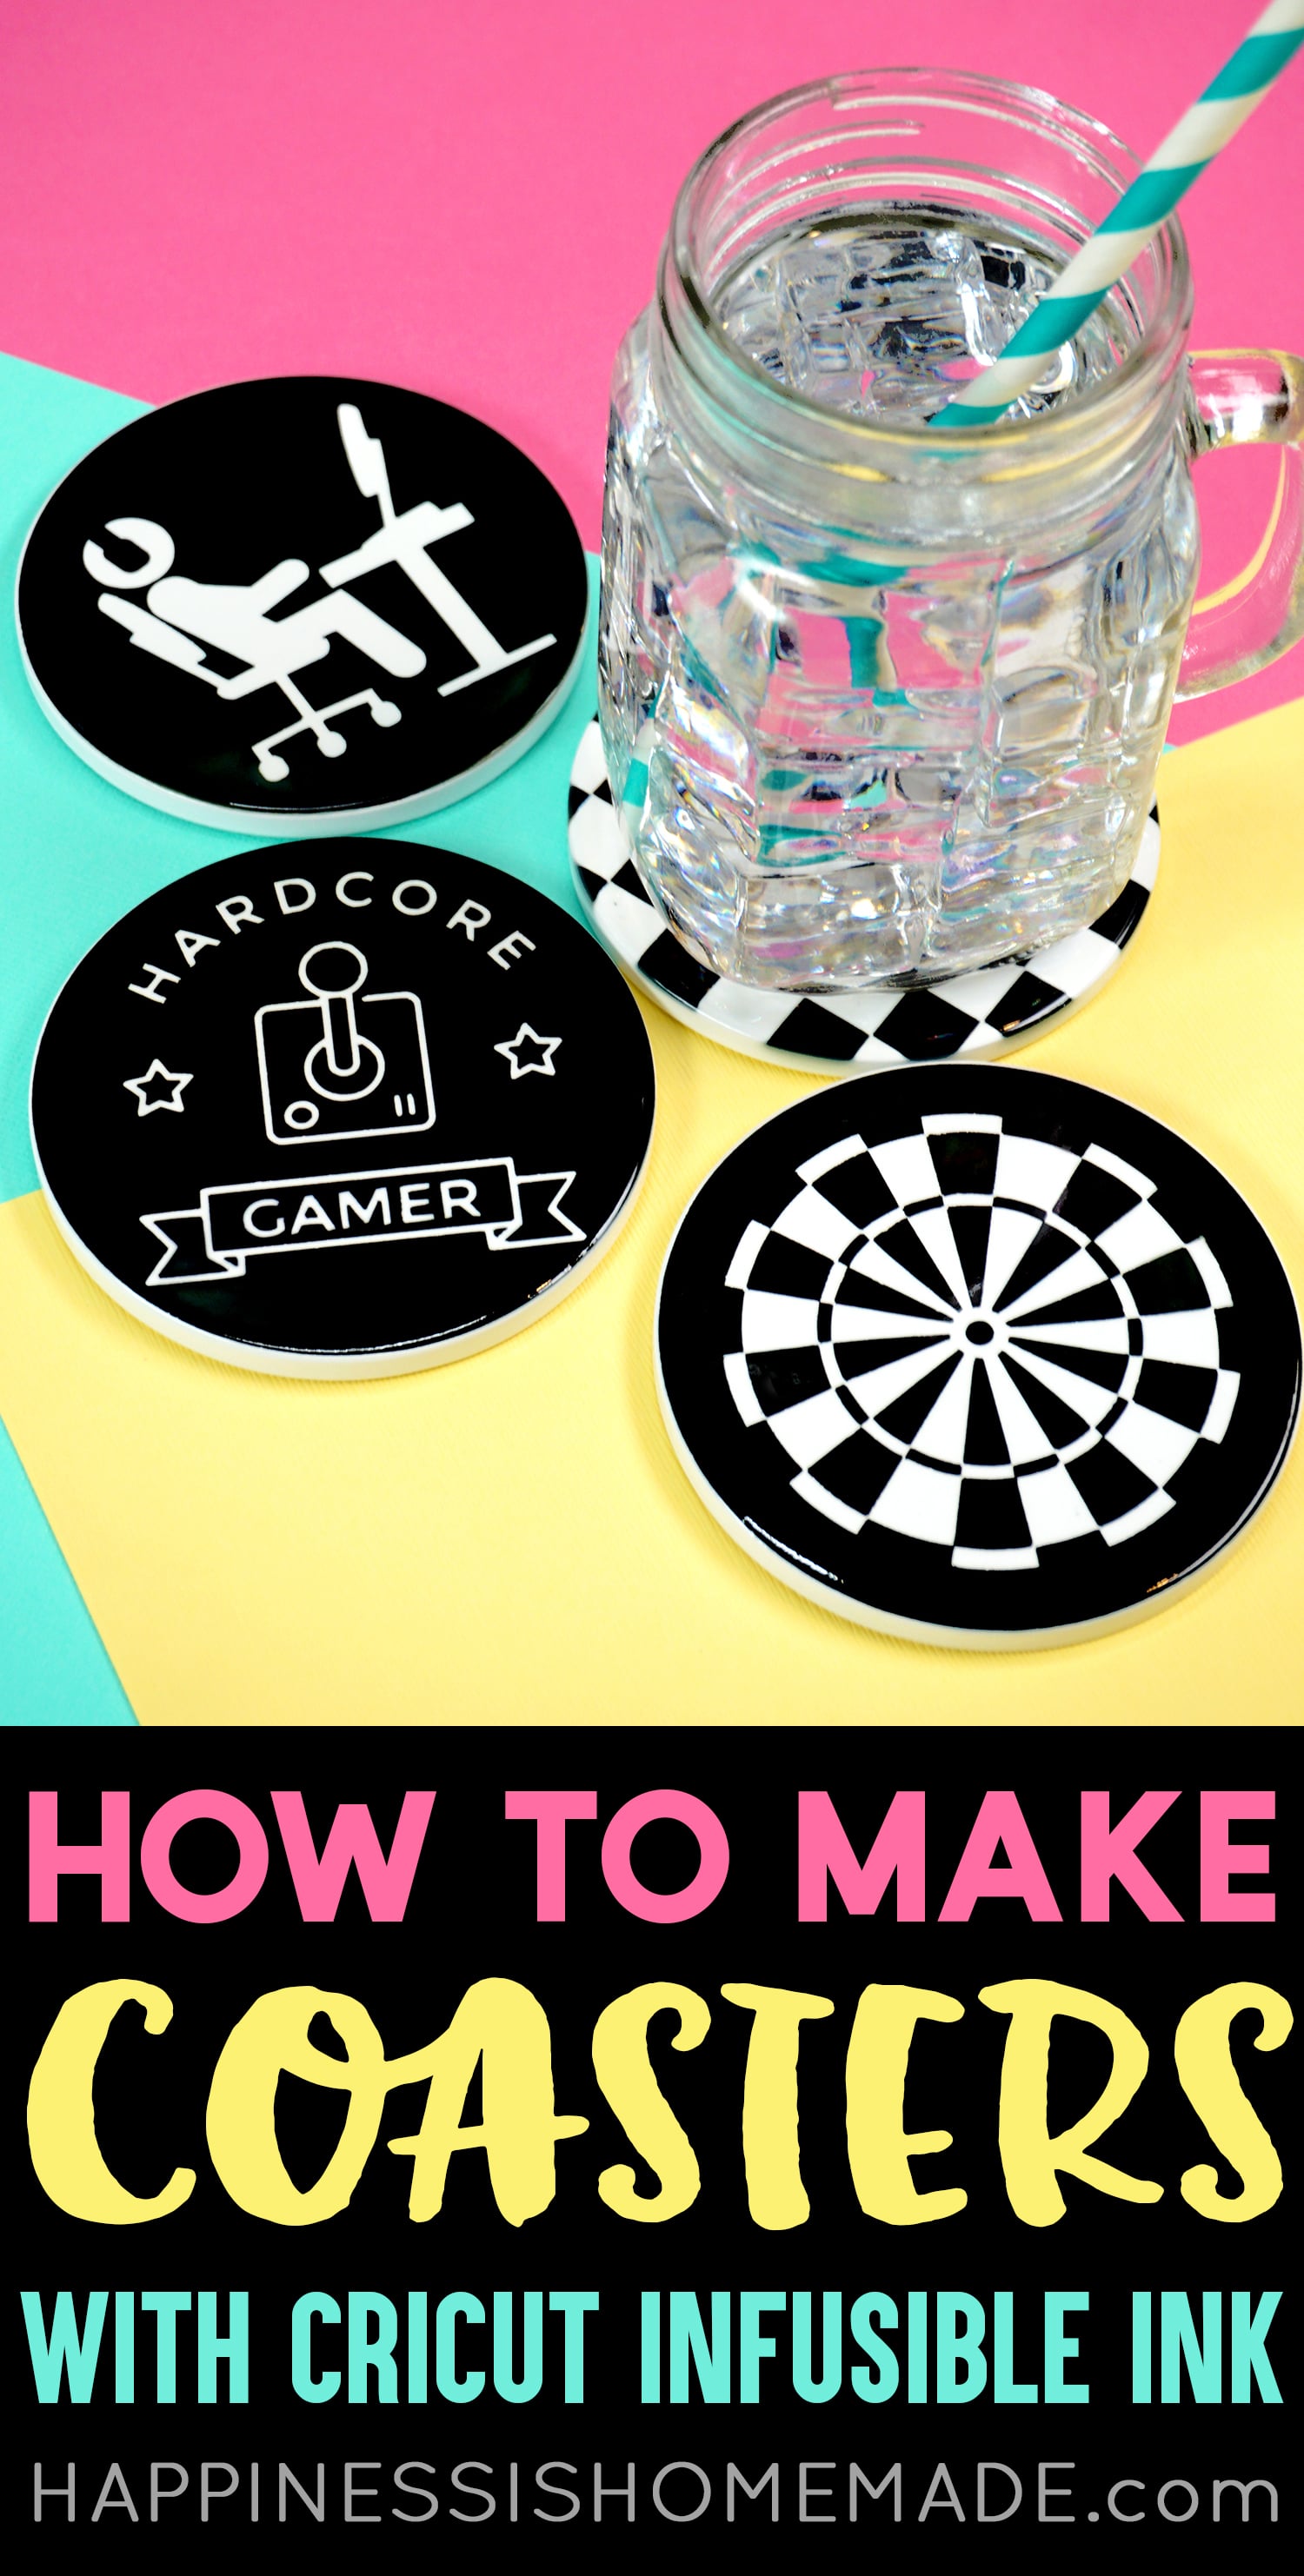 how to make coasters with cricut infusible ink